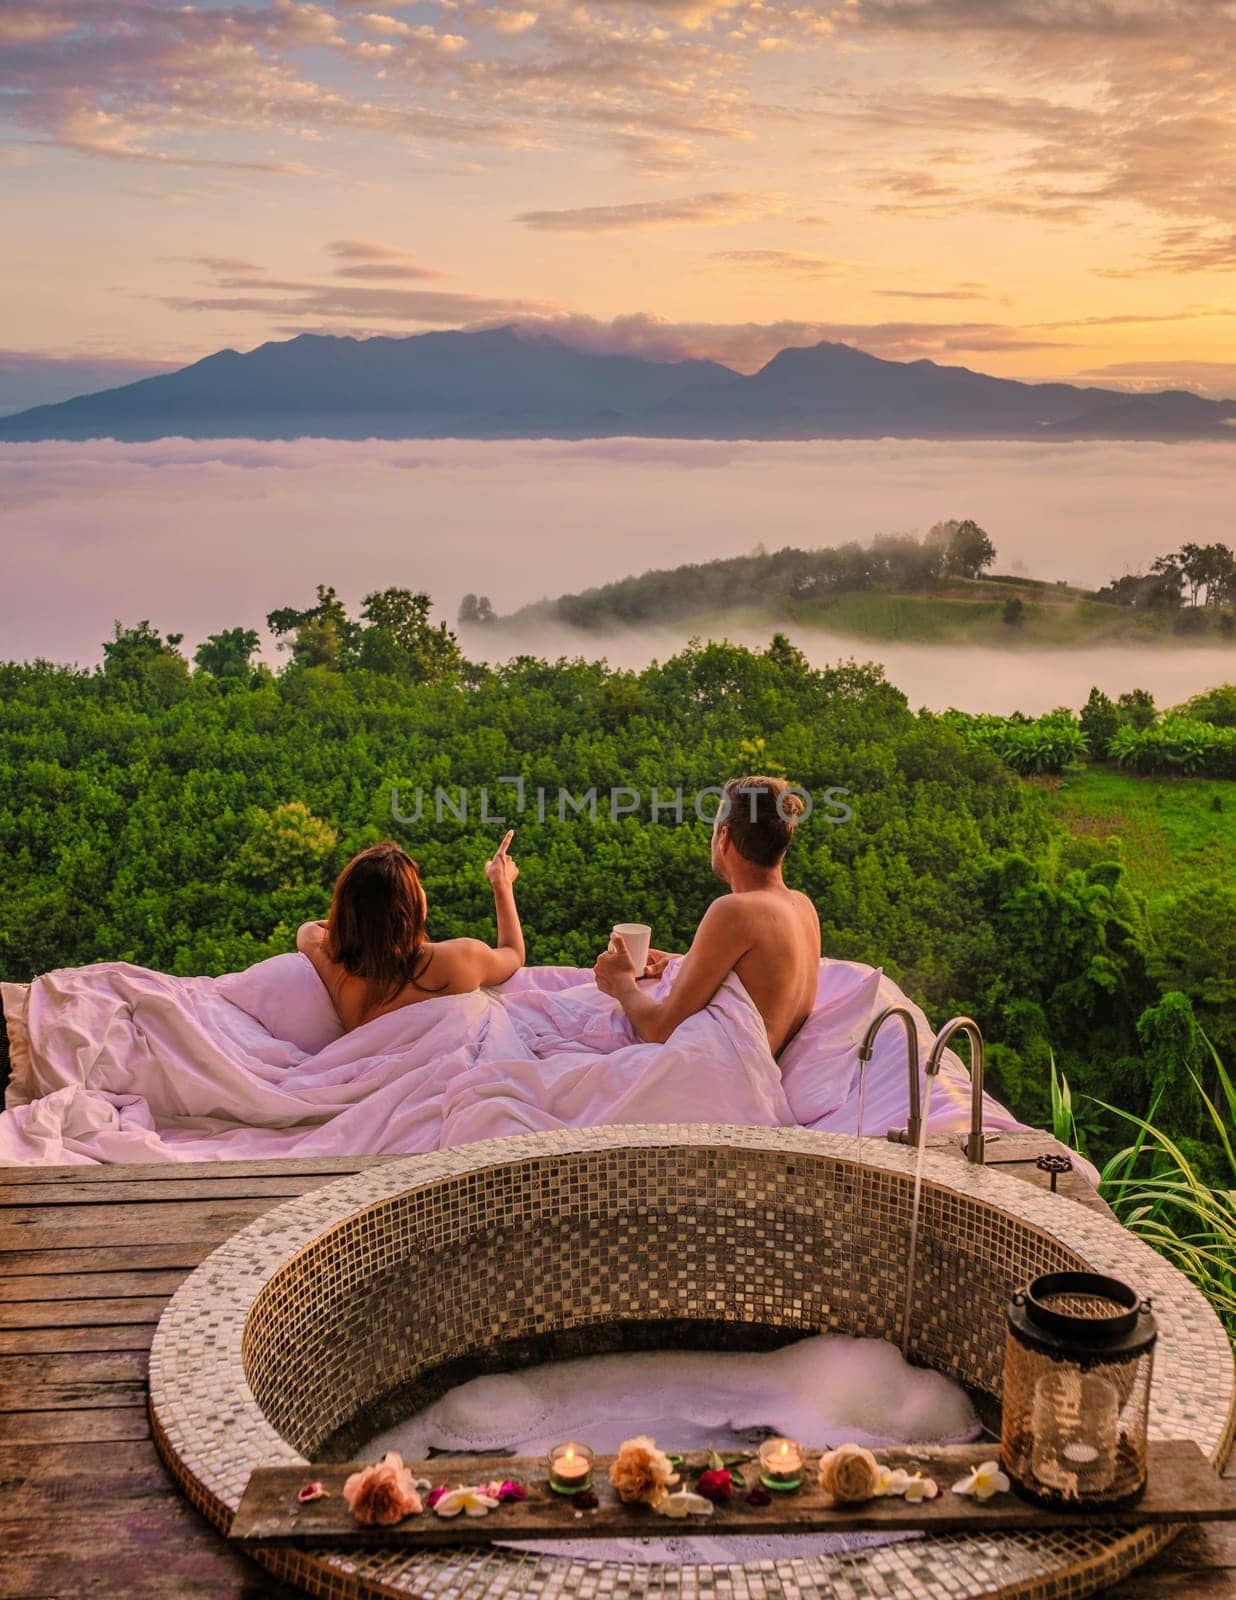 a couple of men and women in an outdoor bed looking out over the mountains of Northern Thailand during vacation. Outdoor bathroom, and bathtub during sunset at the mountains with mist and fog